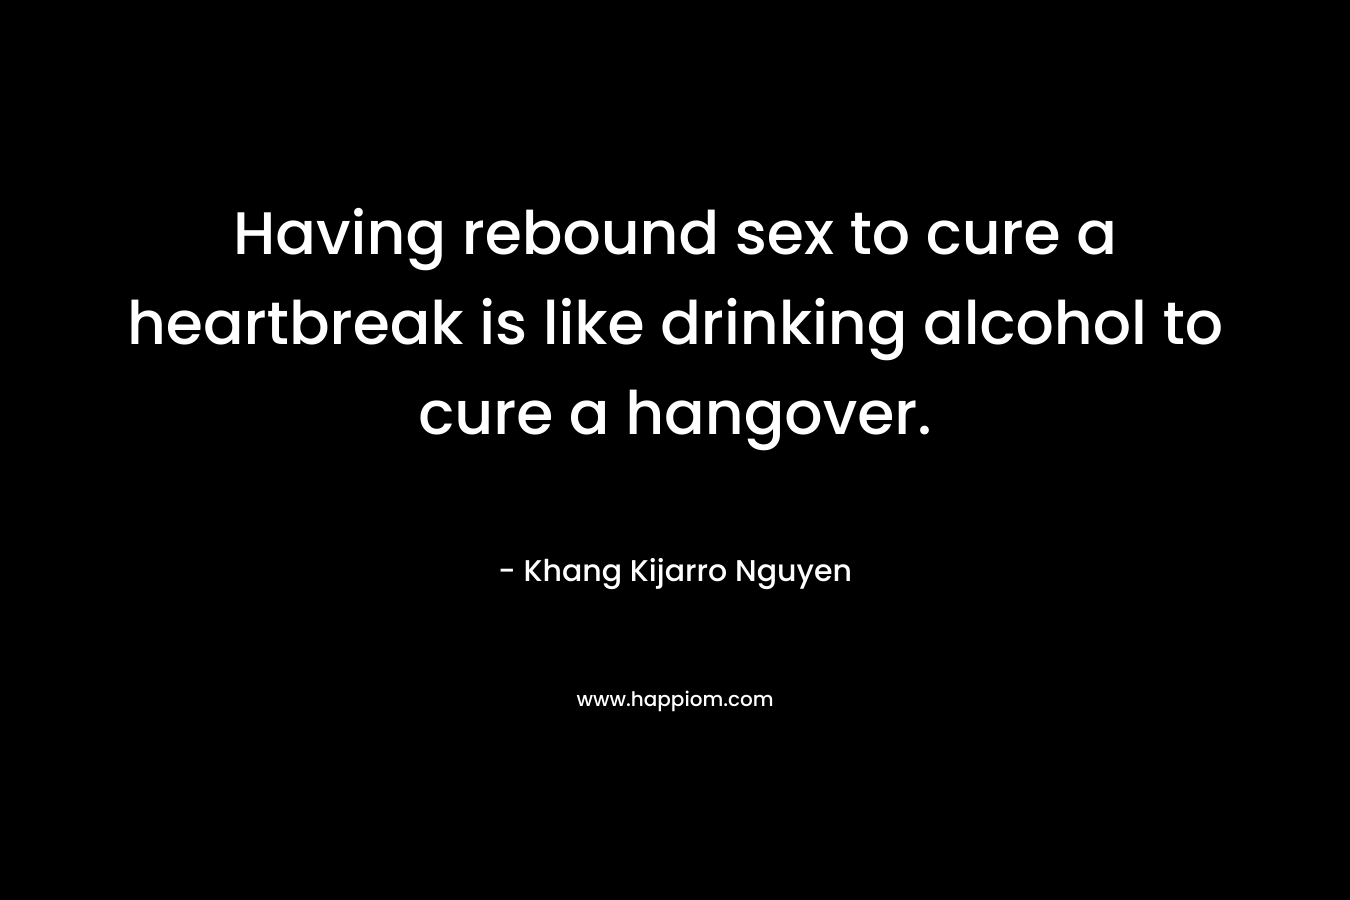 Having rebound sex to cure a heartbreak is like drinking alcohol to cure a hangover.